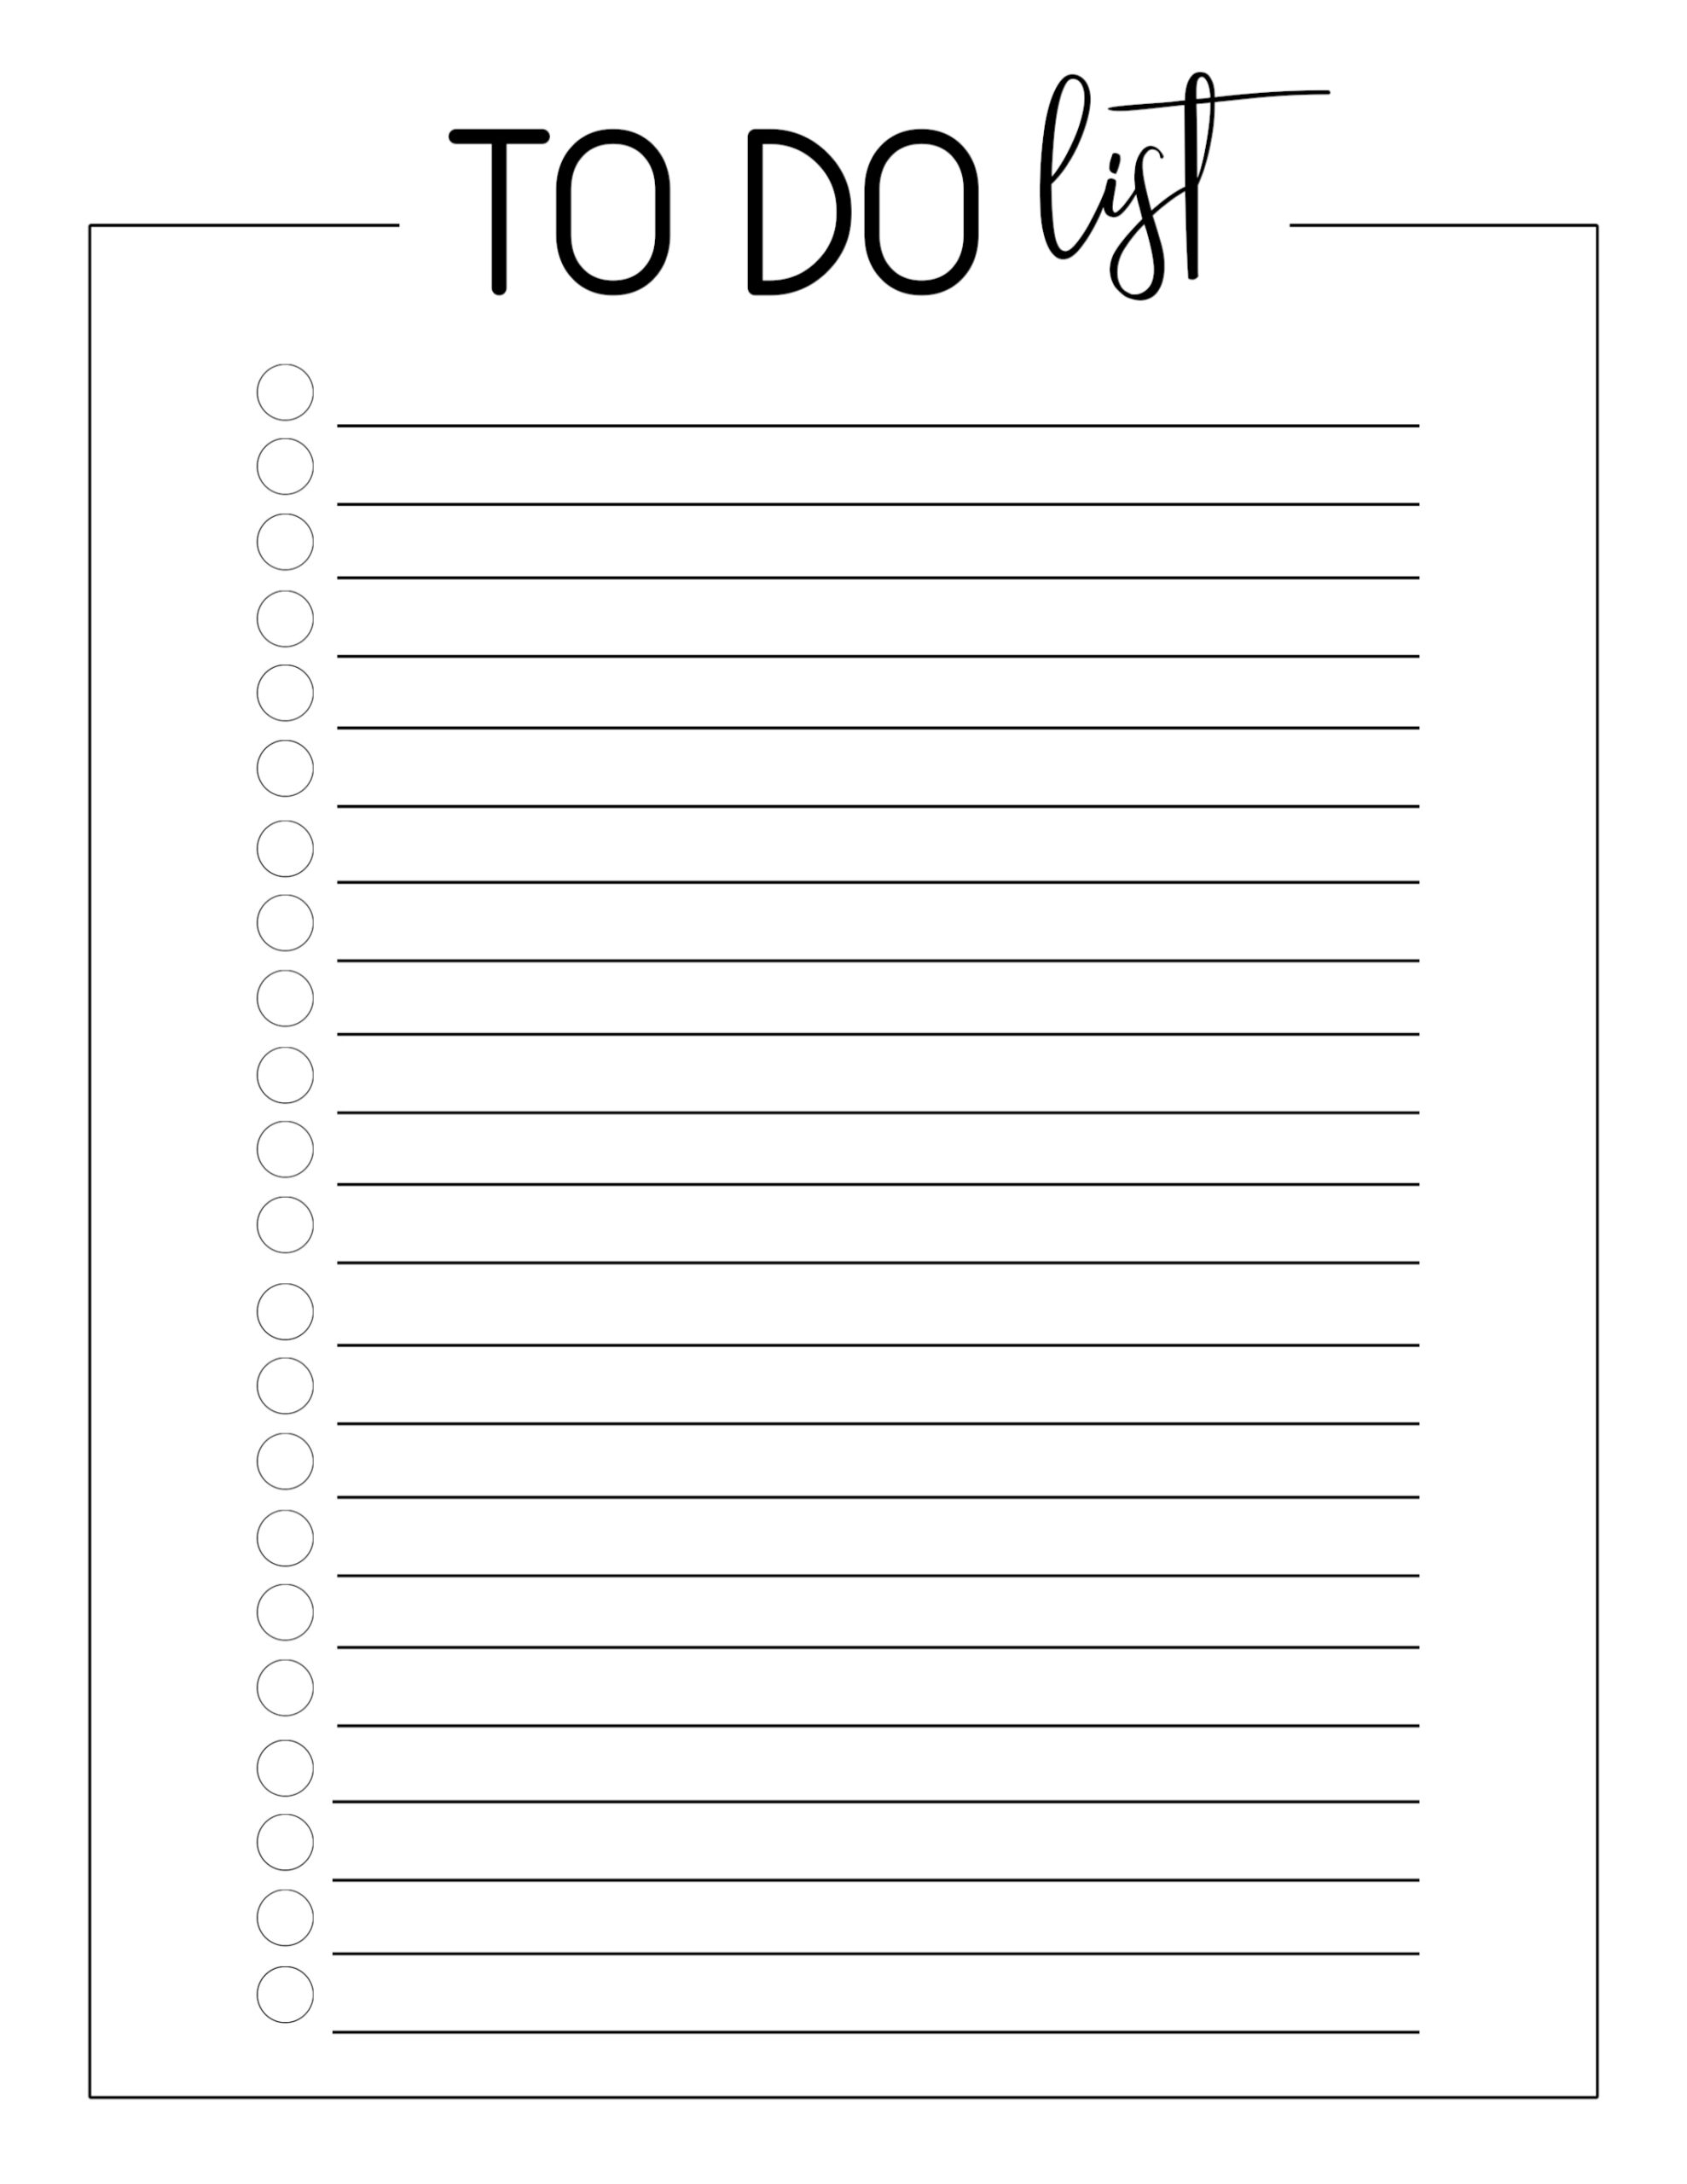 To Do List Printable Free Office